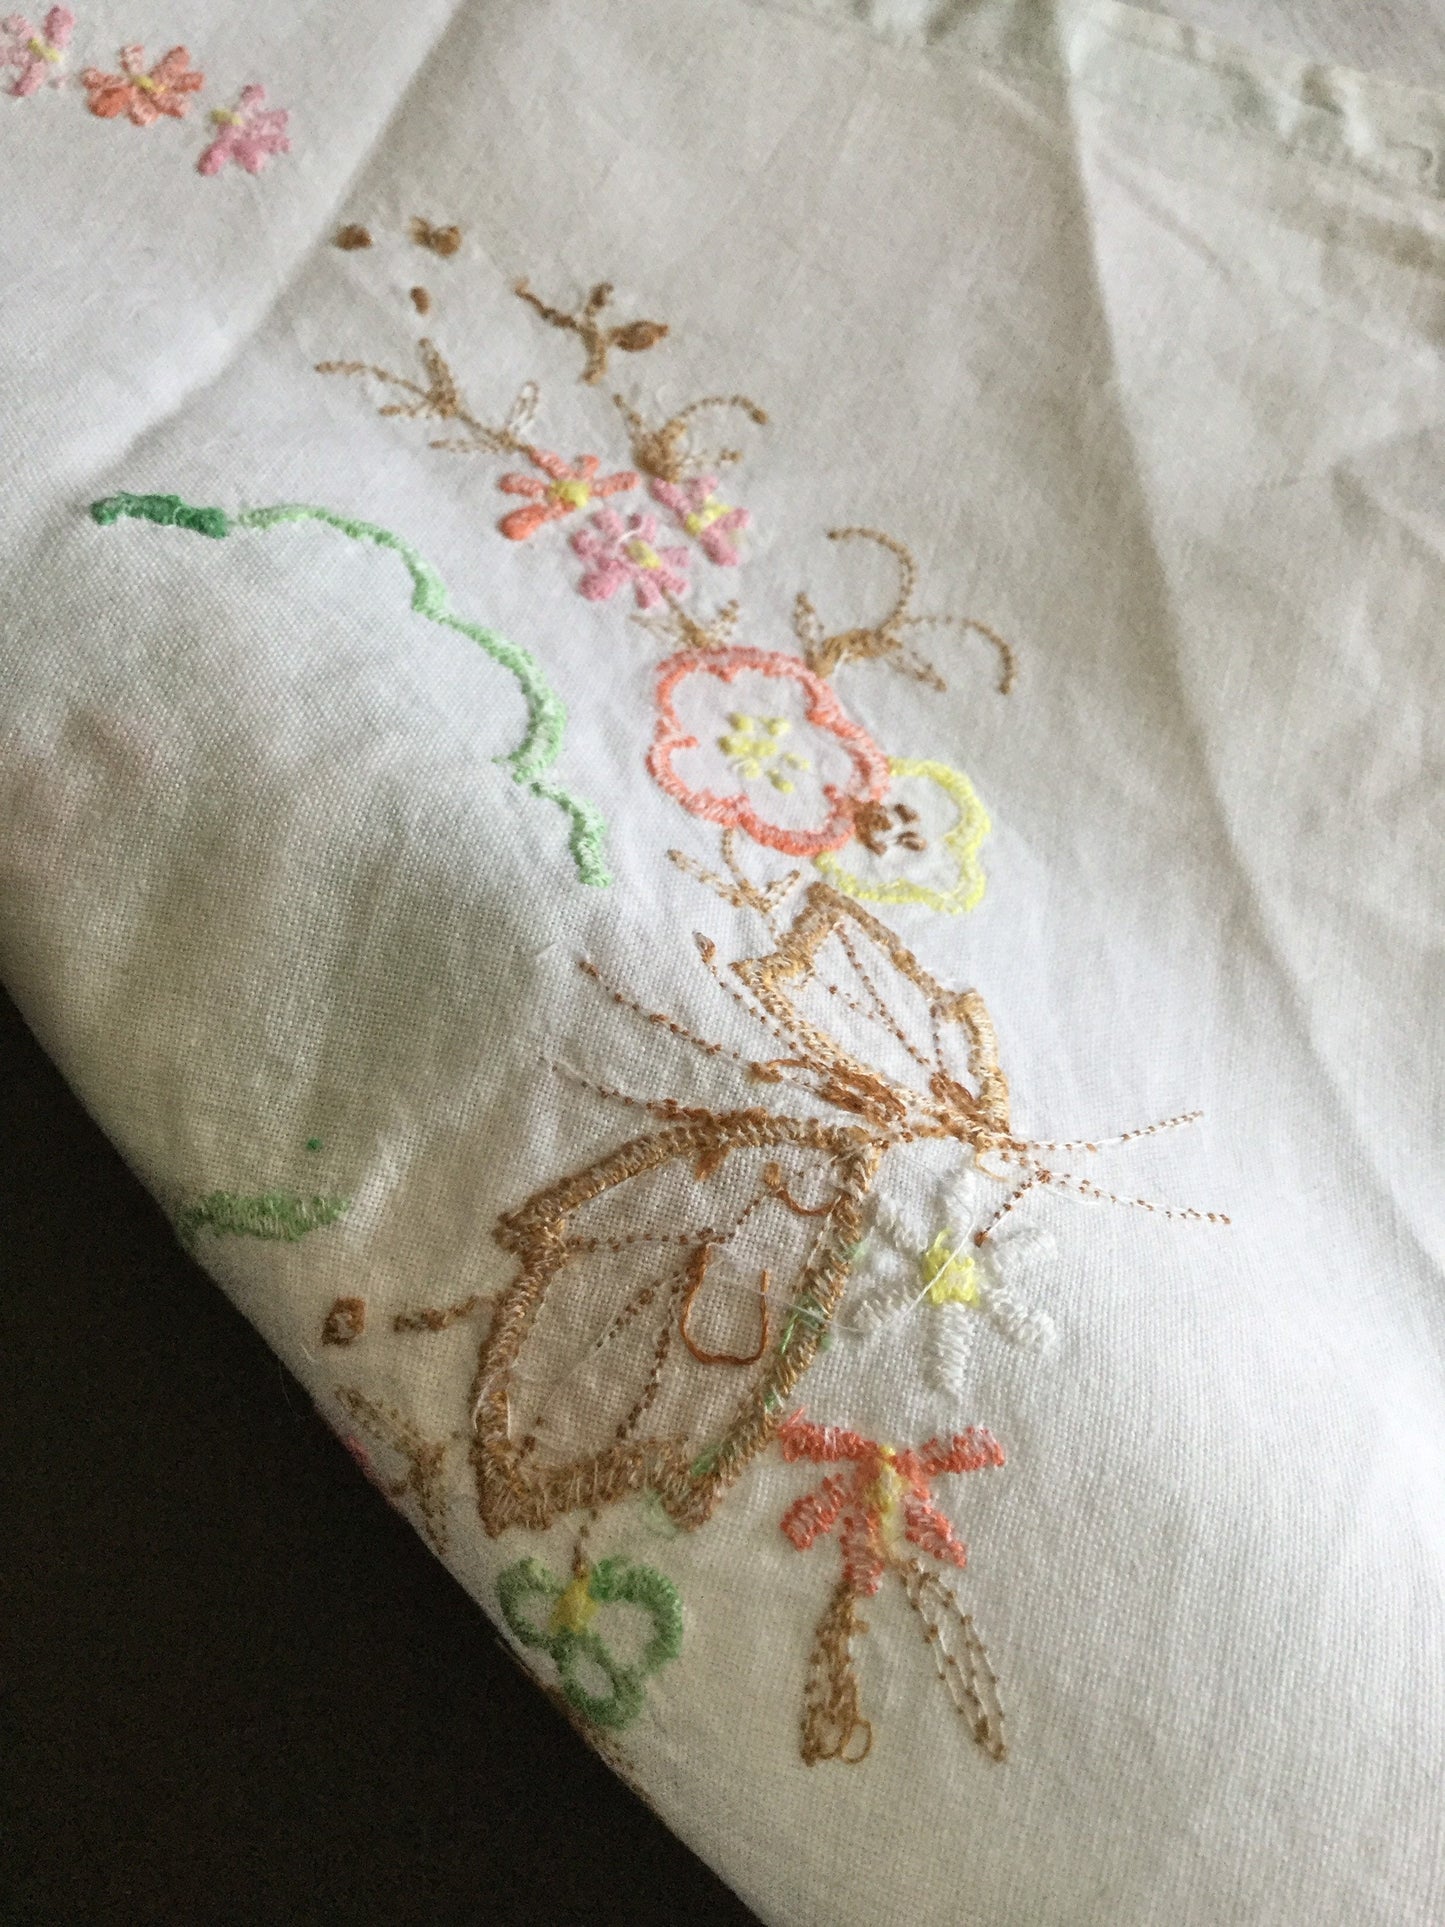 Vintage embroidered pretty floral linen tray cloth place setting mat